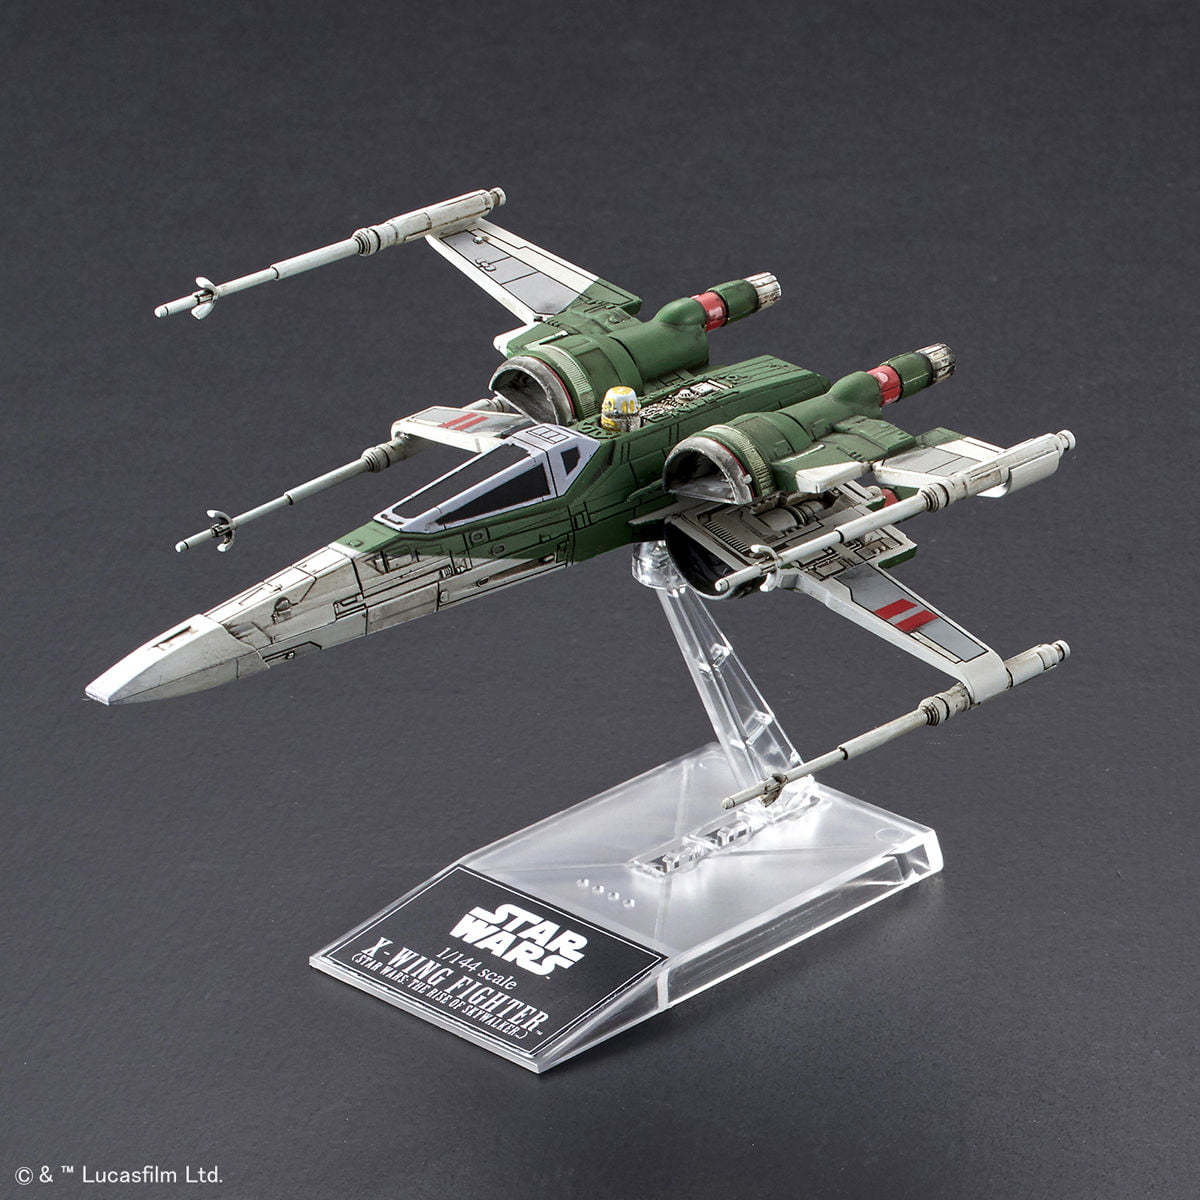 Details about   Bandai 1/144 Model Kit Star Wars The Rise of Skywalker Poe's X-Wing Fighter NEW 